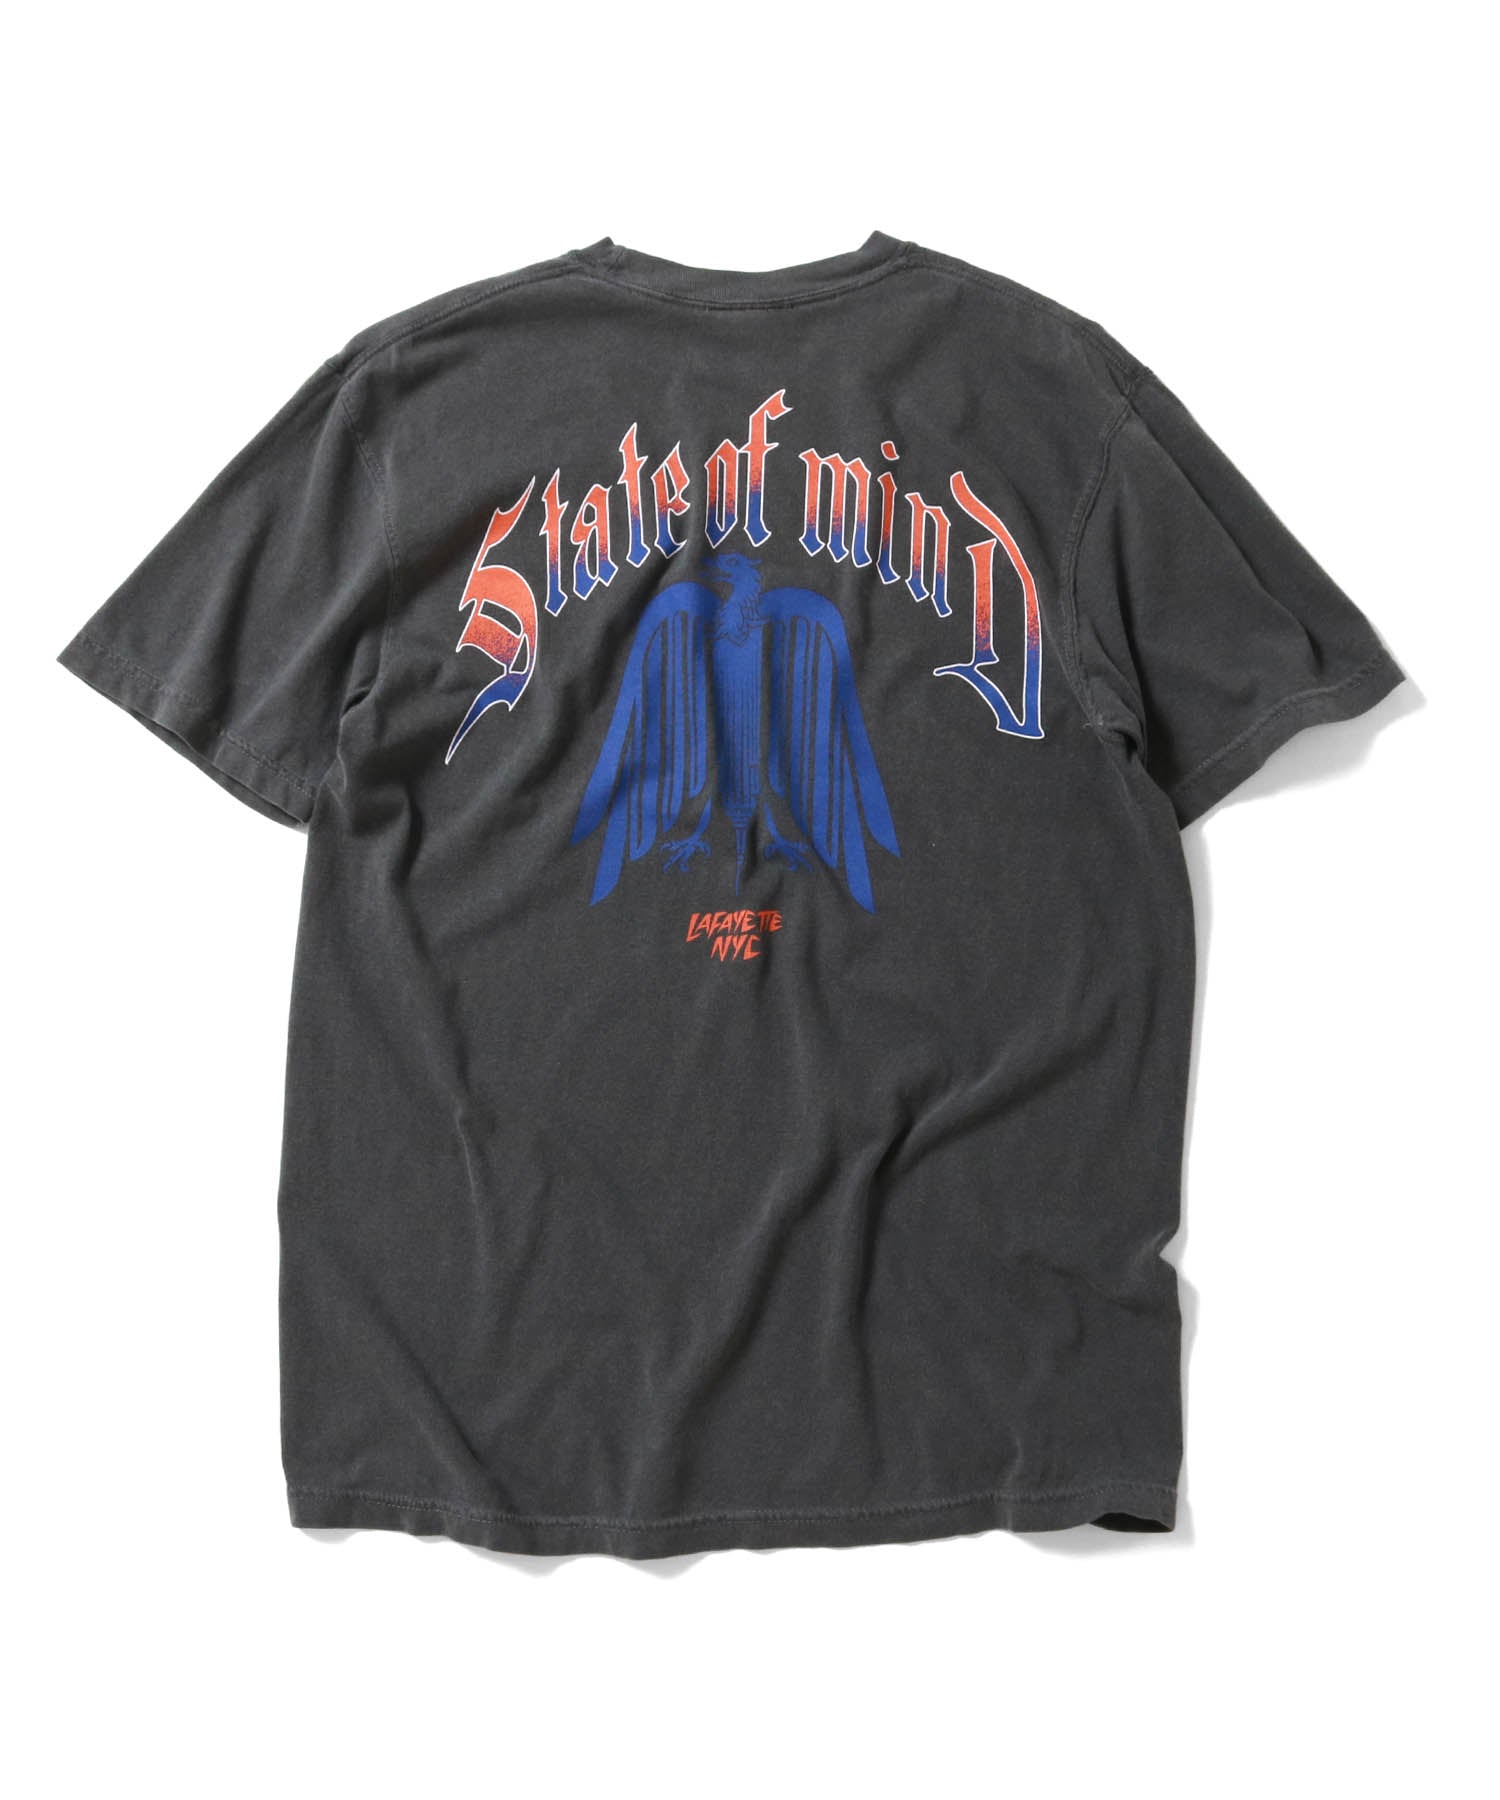 LFYT STATE OF MIND Tee BLACK